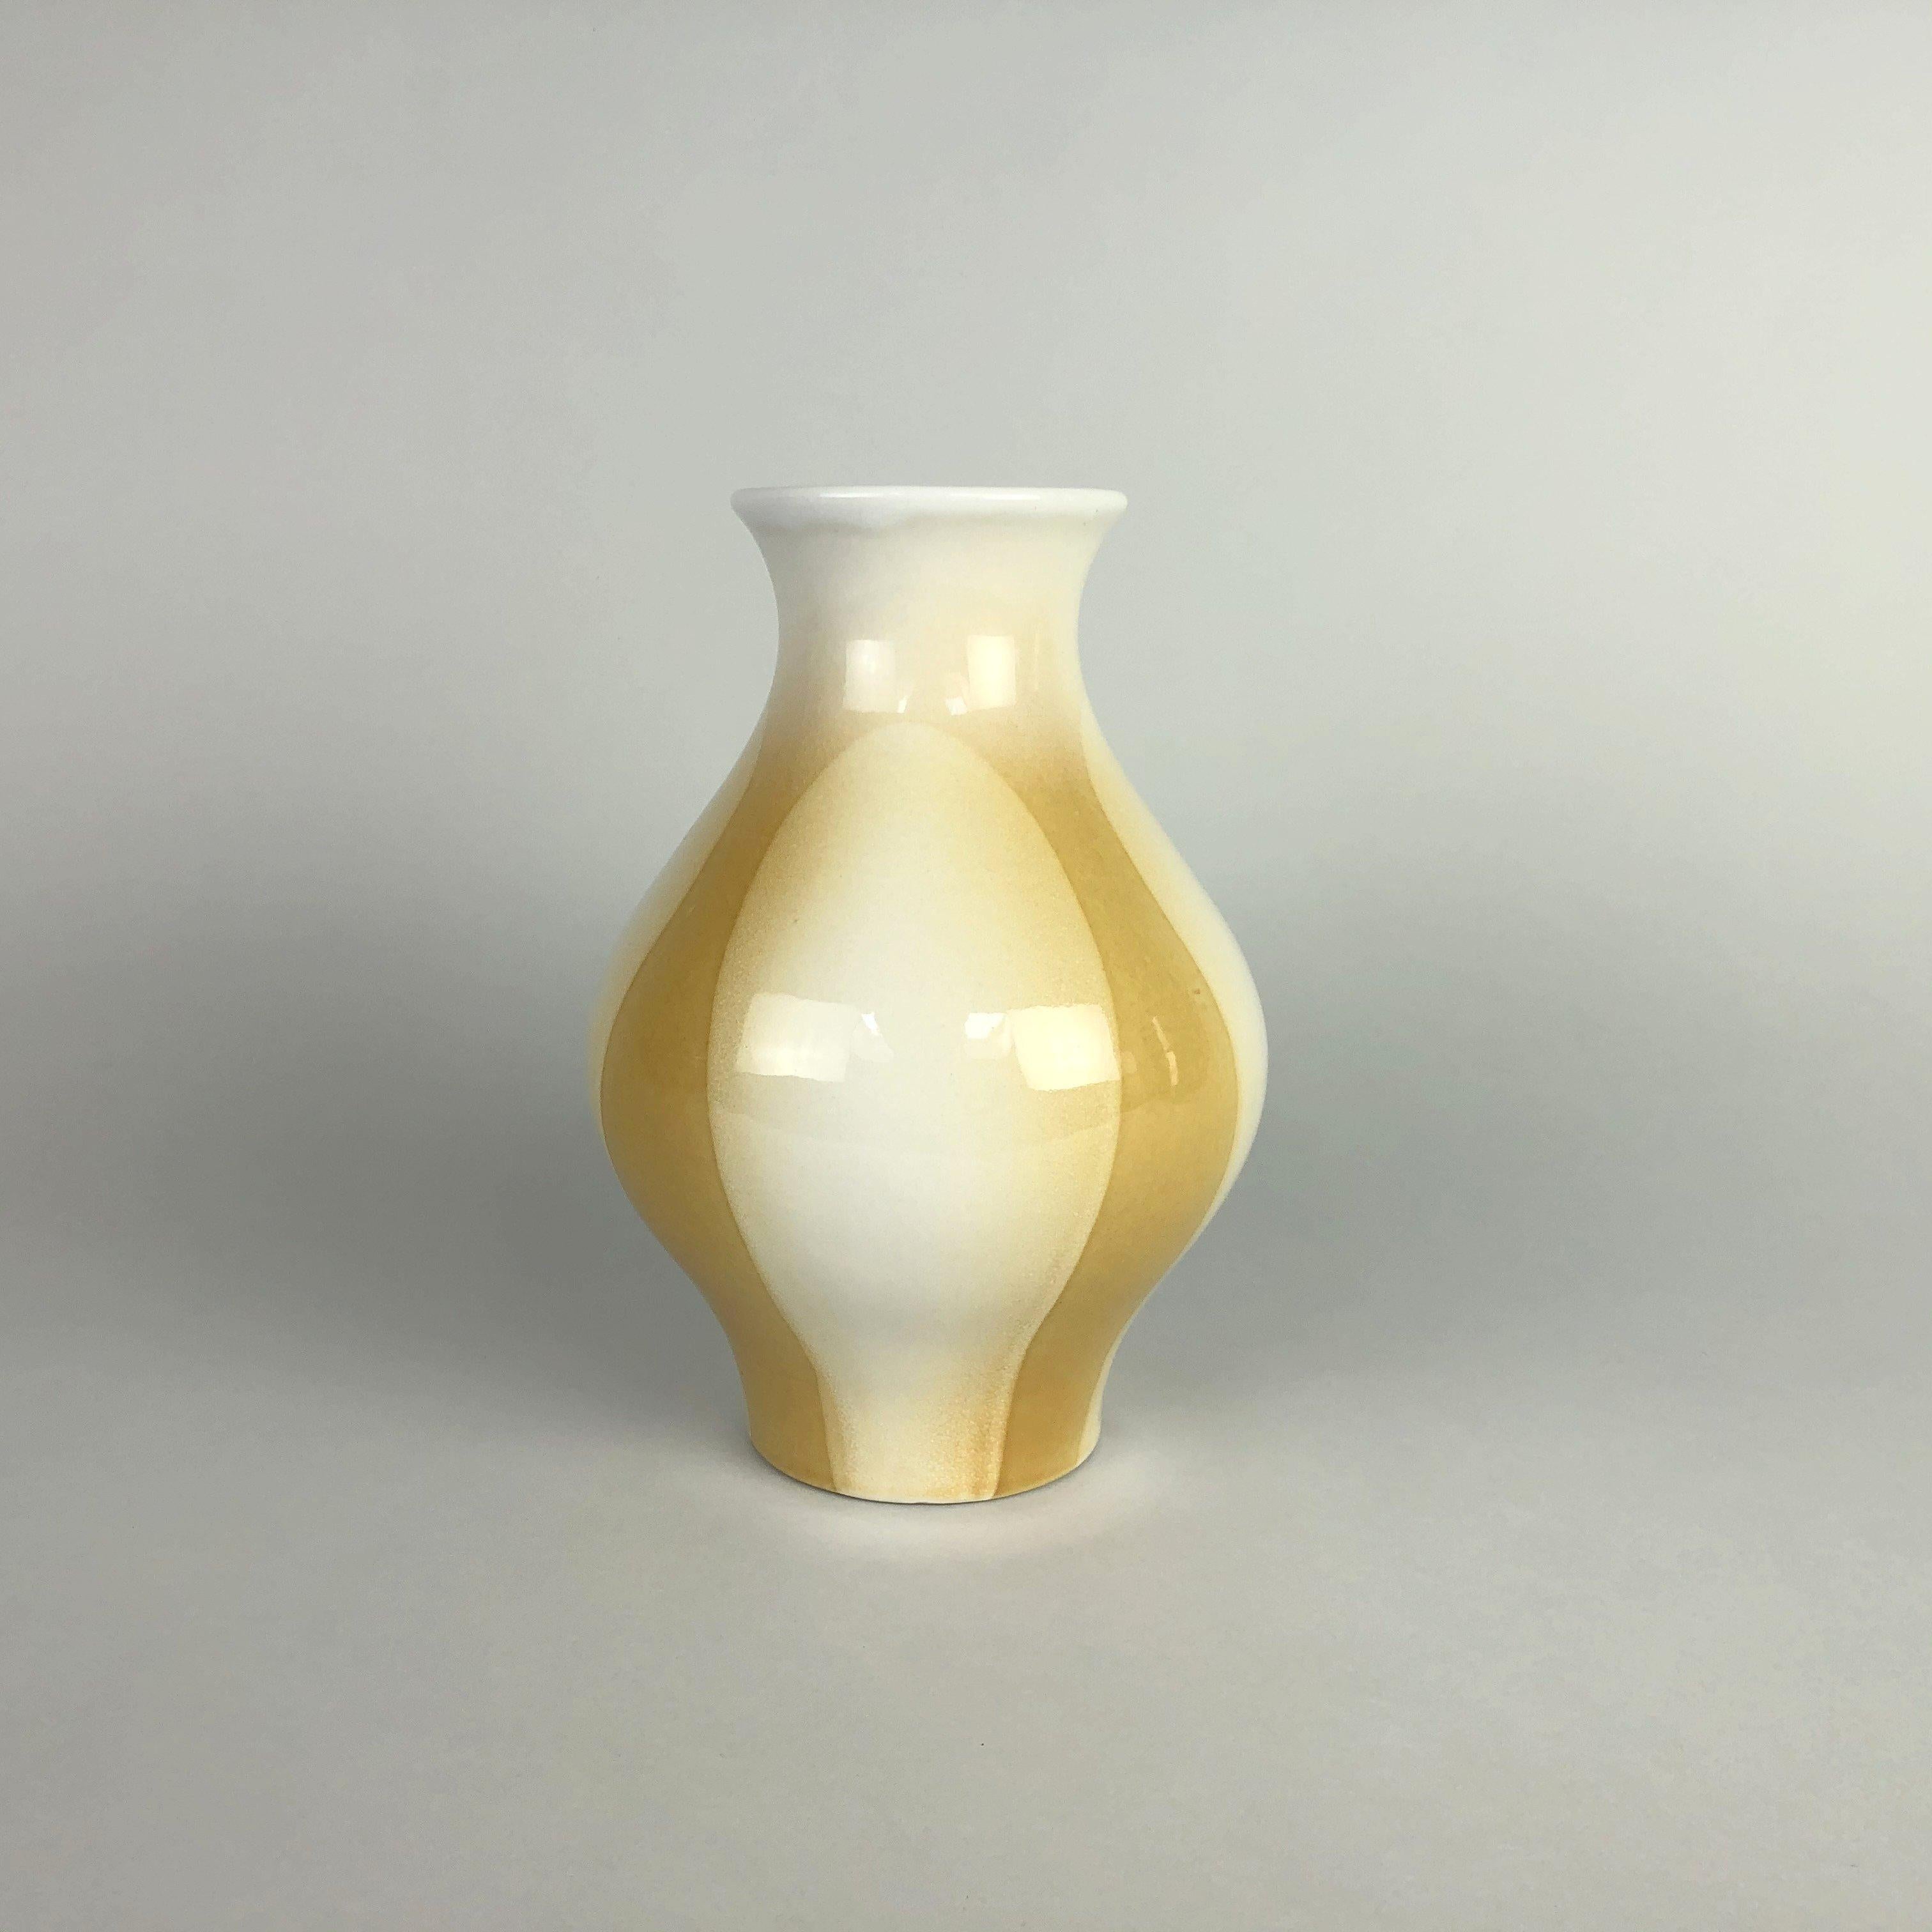 Vintage ceramic vase produced by Ditmar Urbach in Czechoslovakia in 1964. Collection Julie.